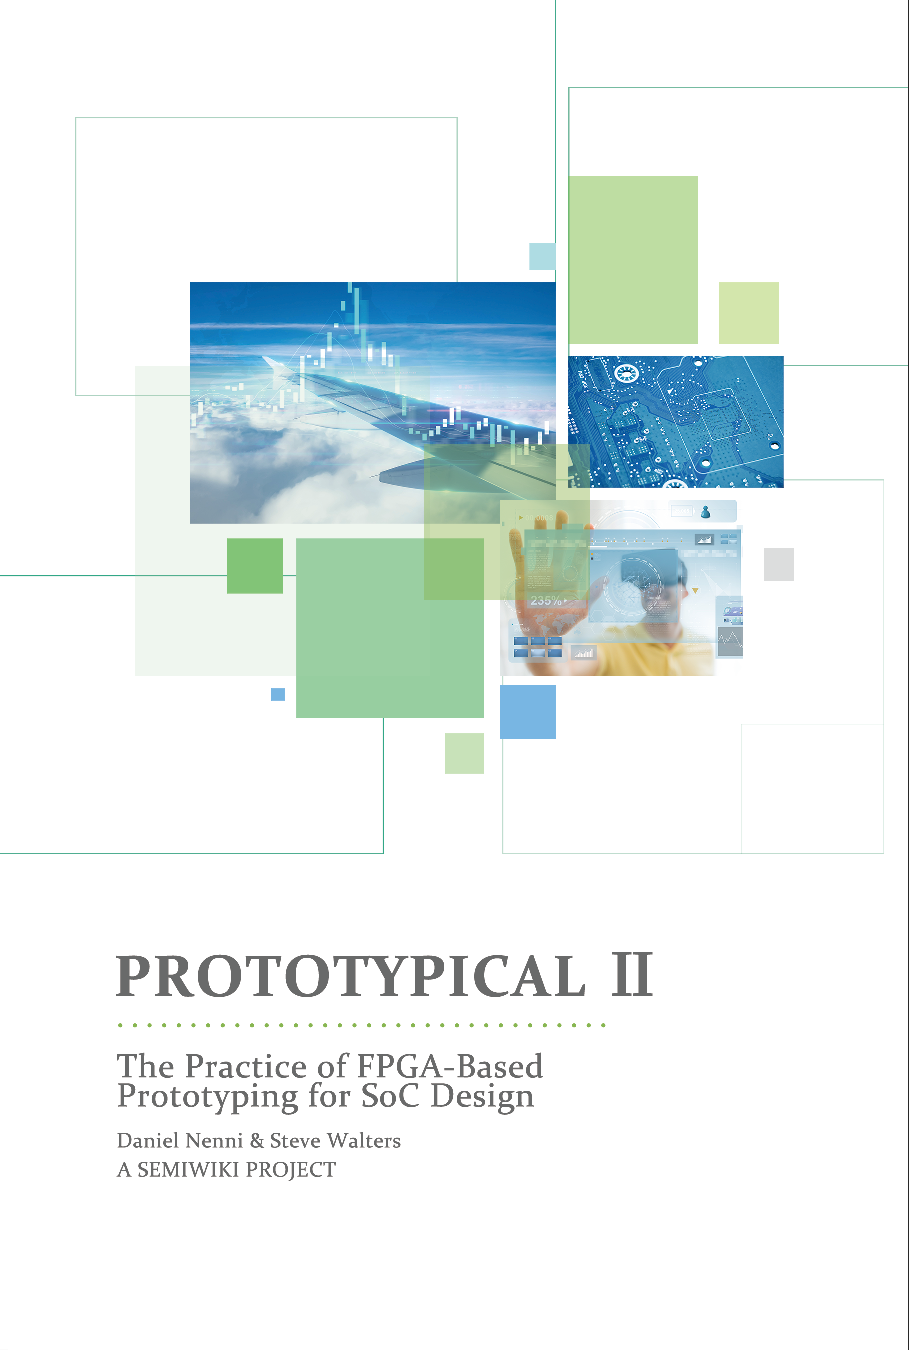 E-book: PROTOTYPICAL II - The Practice of FPGA-Based Prototyping for SoC Design